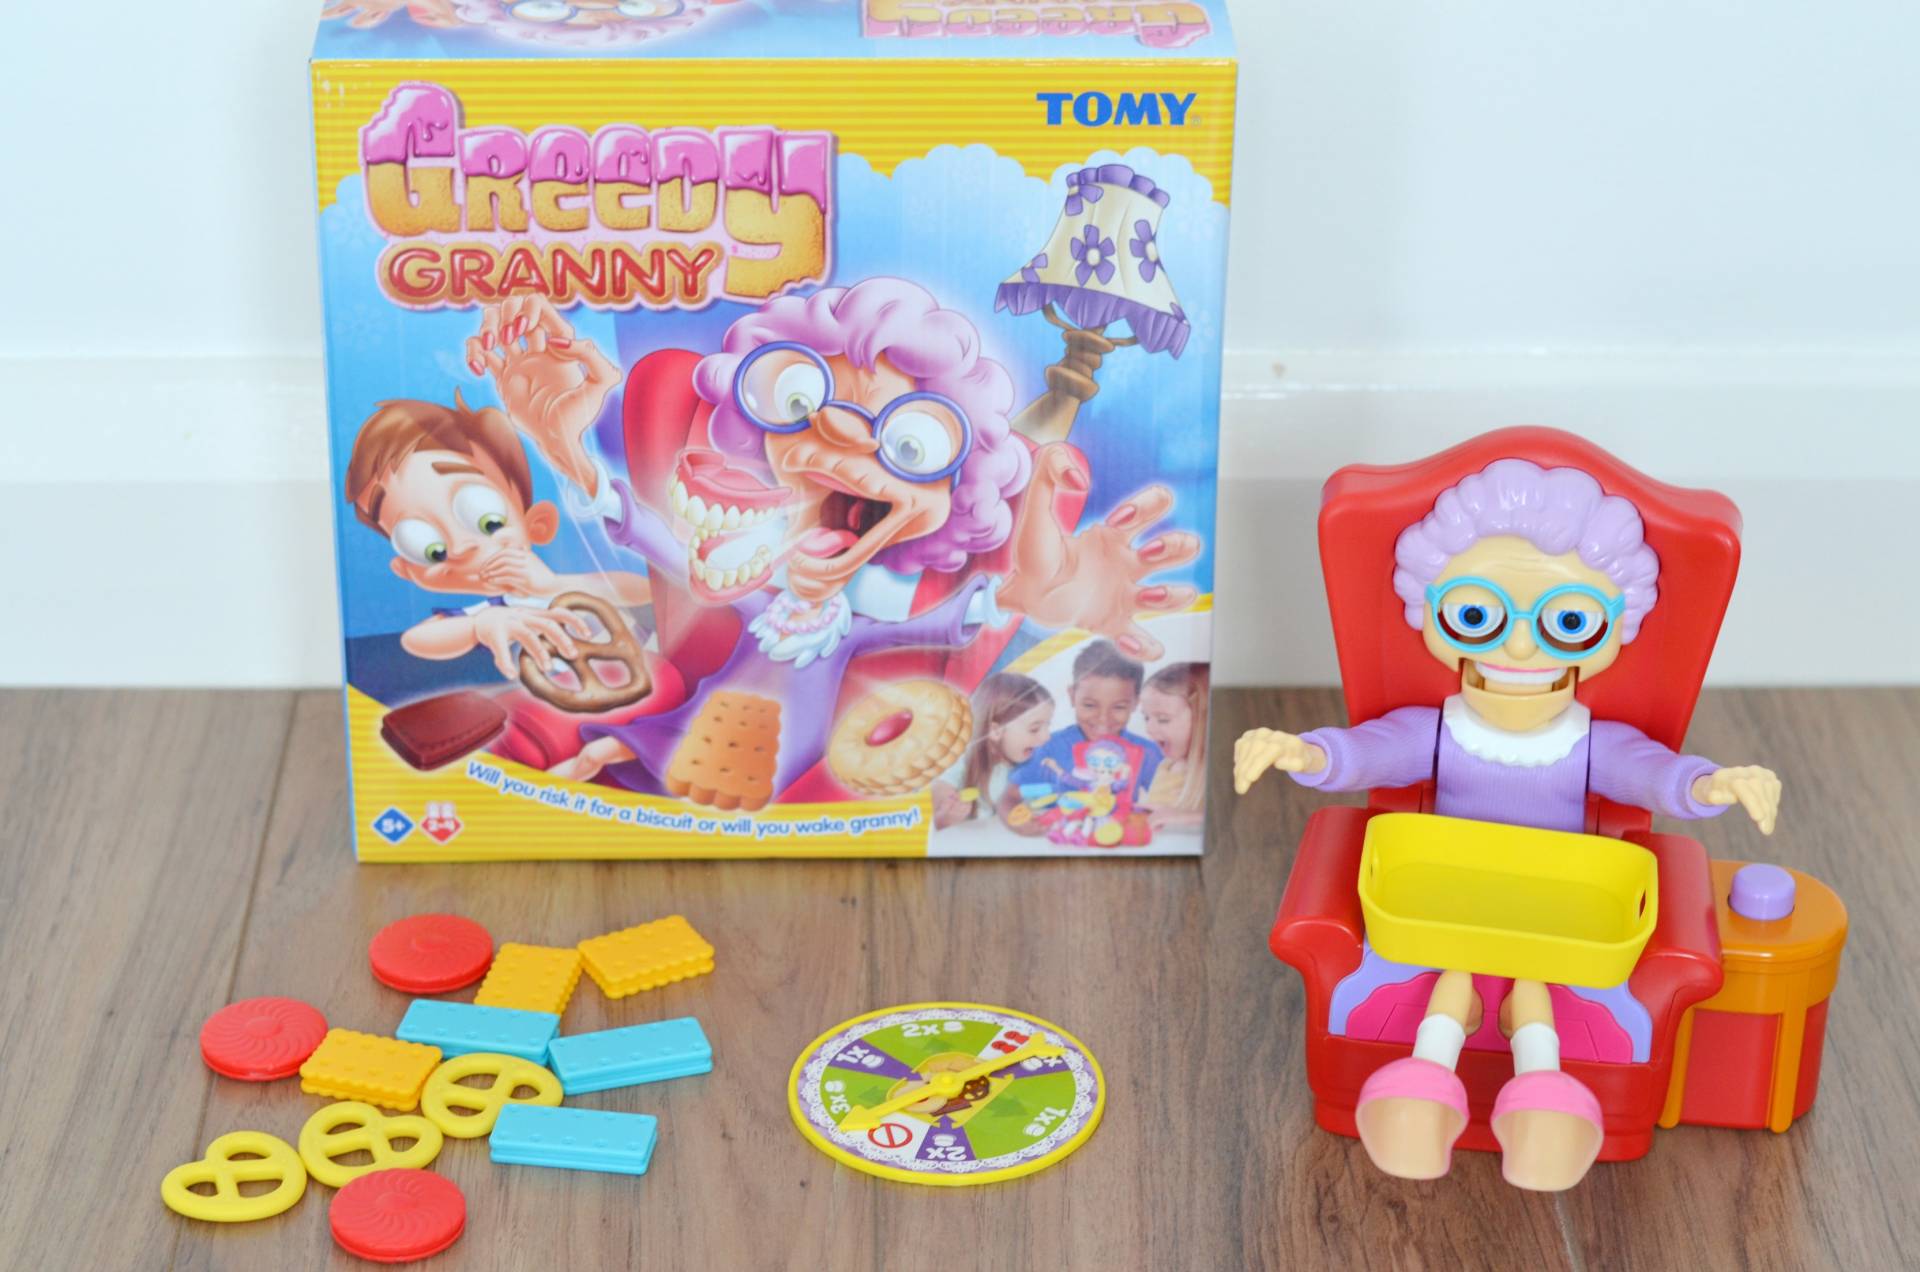 Review // TOMY Greedy Granny Game - Love From Mummy